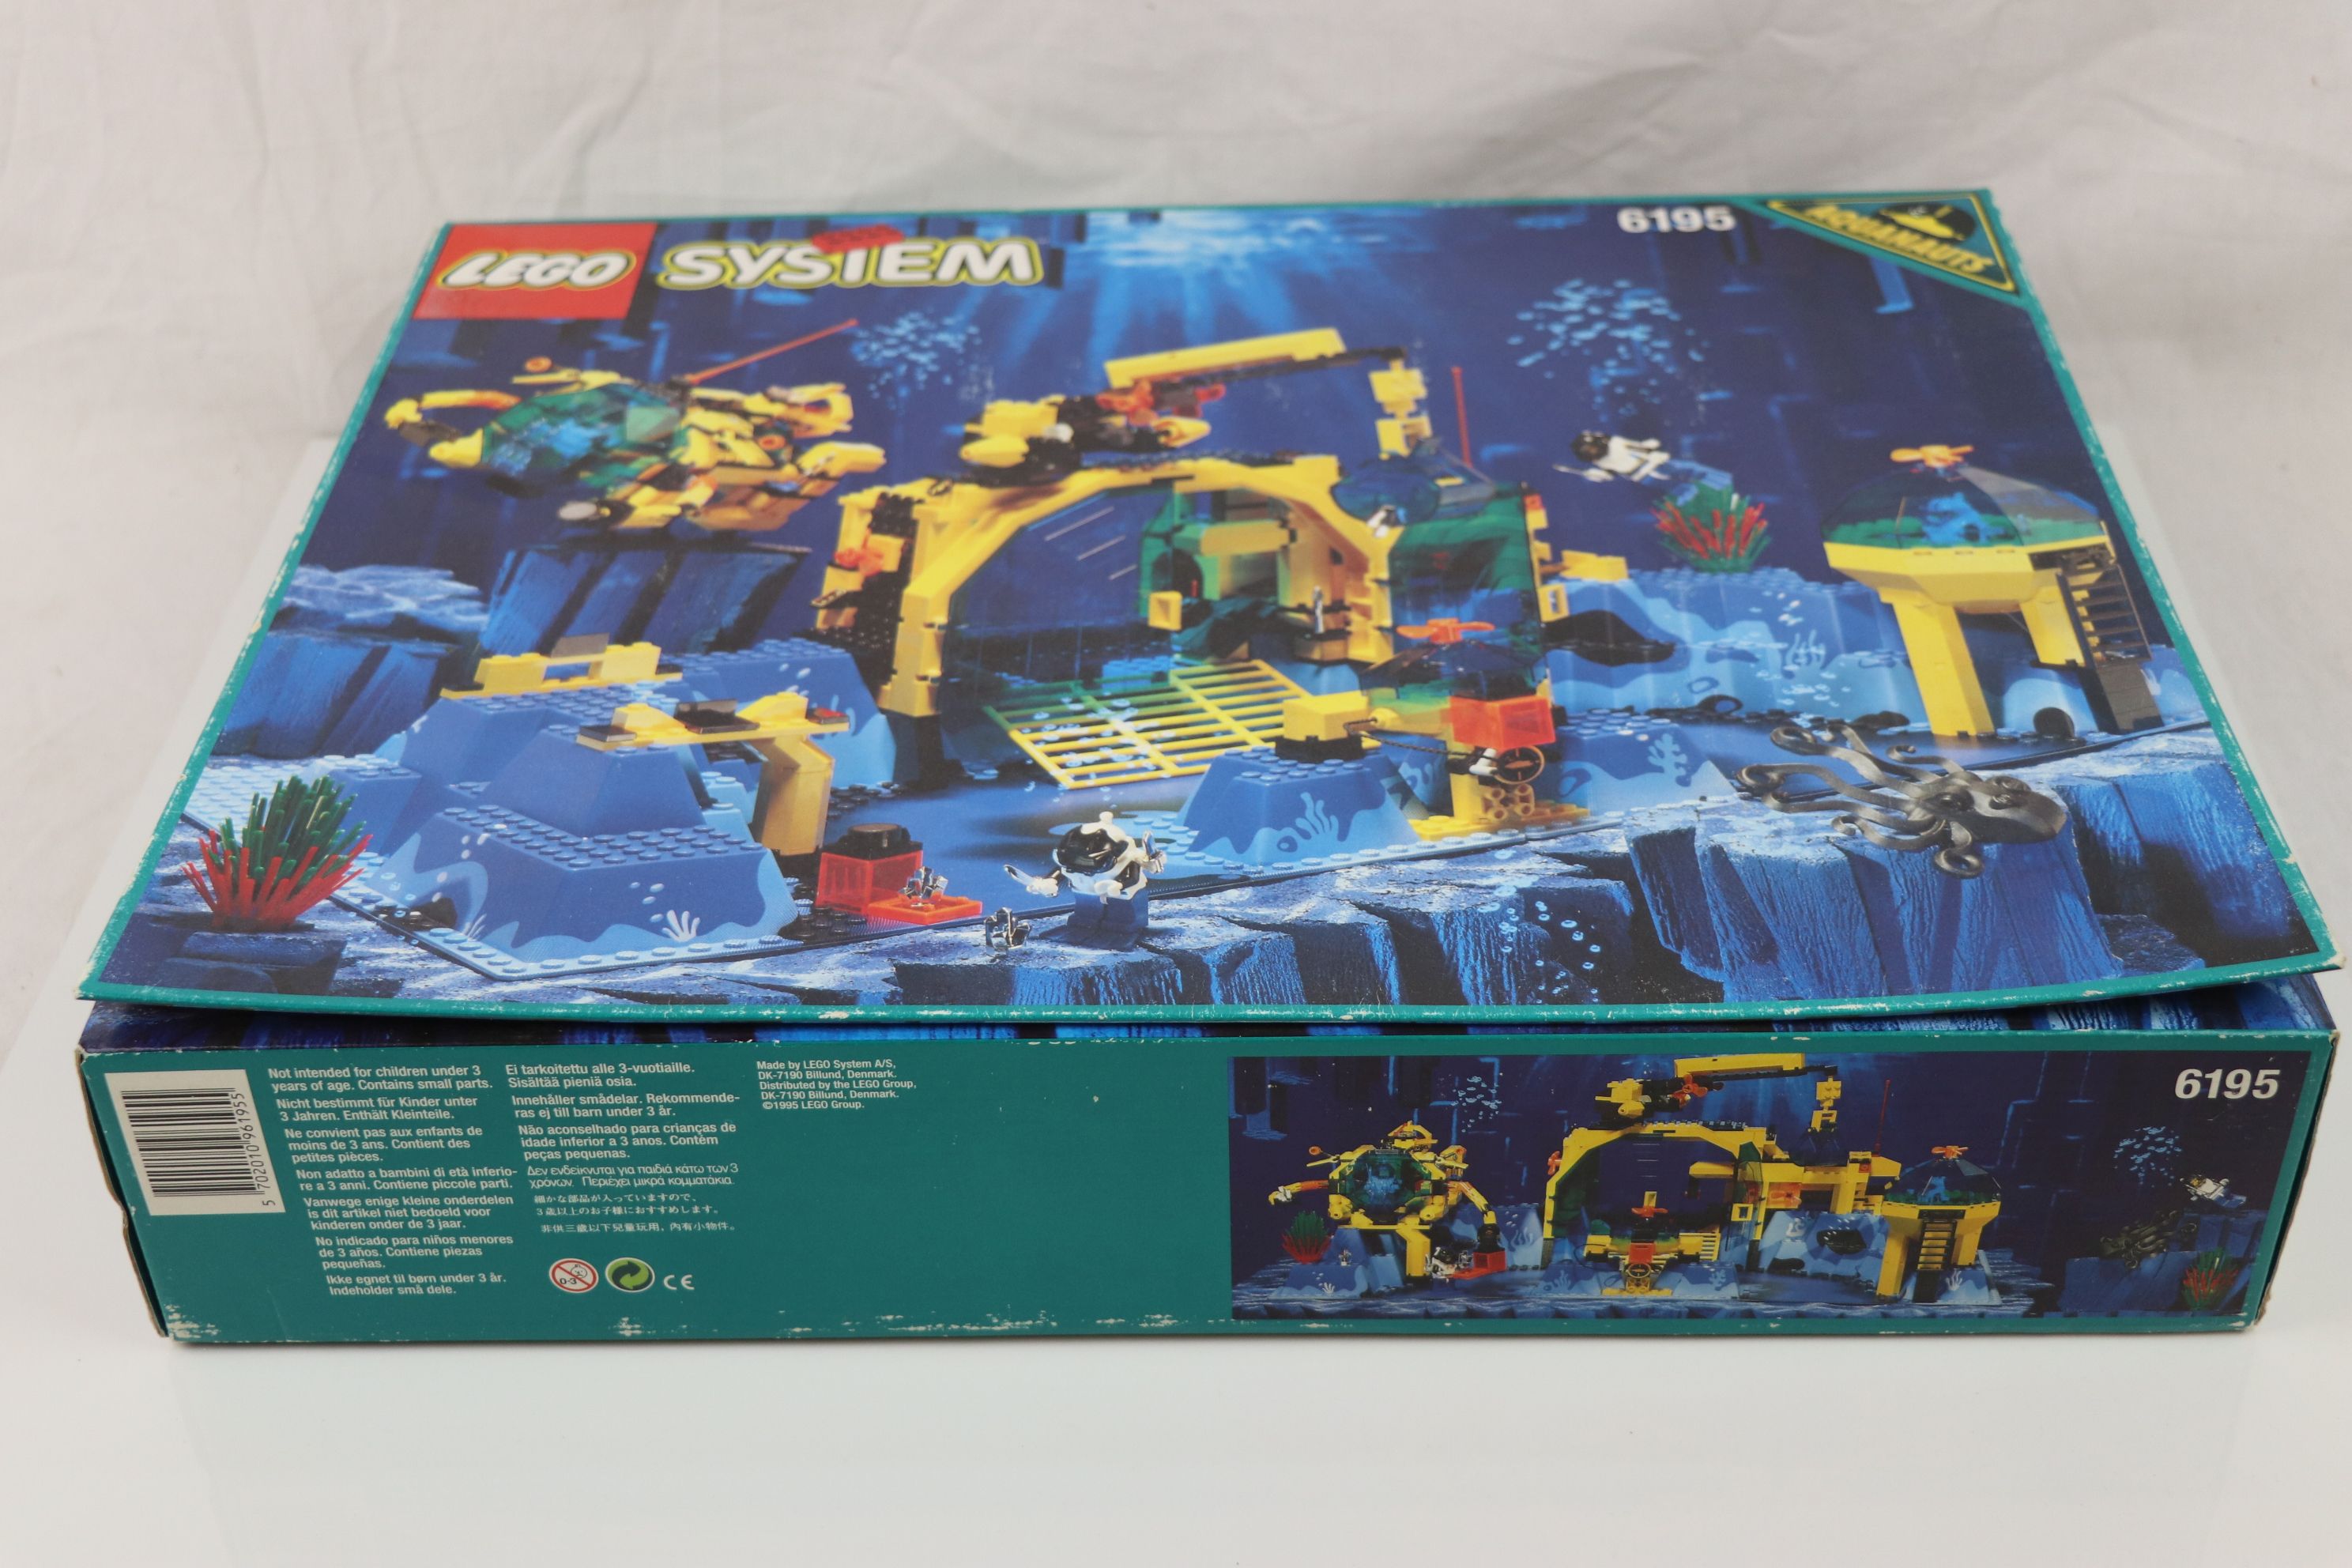 Lego - Boxed Lego System 6195 Aquanauts Neptune Discovery set unchecked but appearing complete - Image 14 of 16